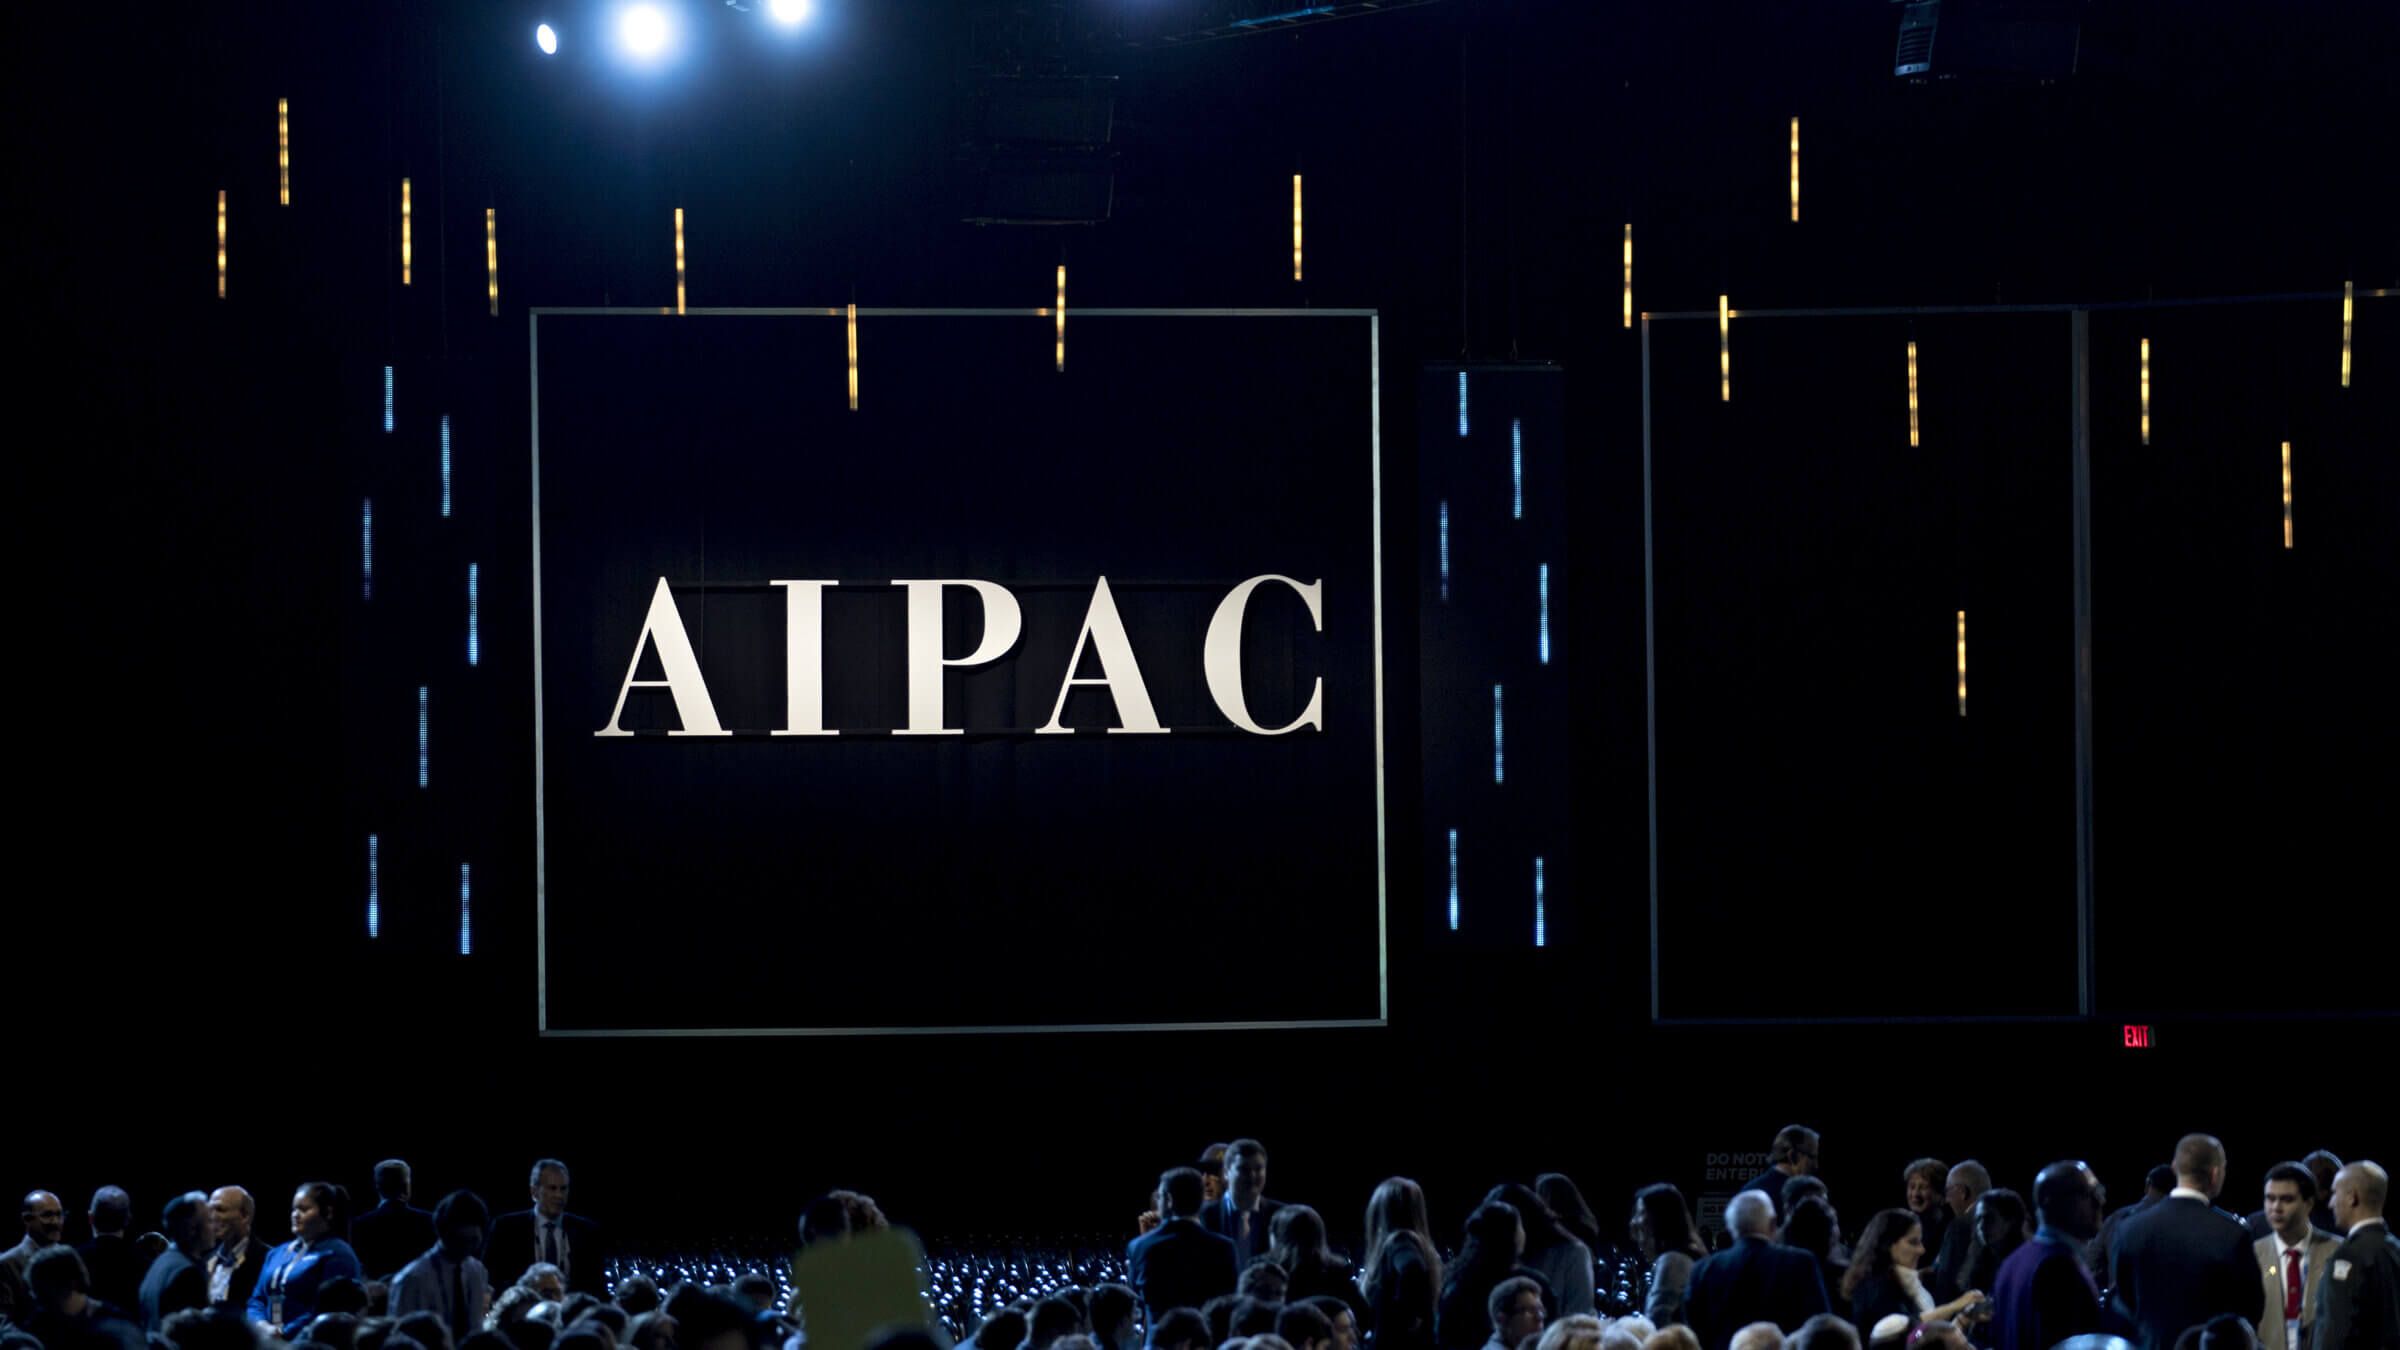 The AIPAC logo is displayed during the policy conference in Washington, D.C., U.S., on March 25, 2019. 